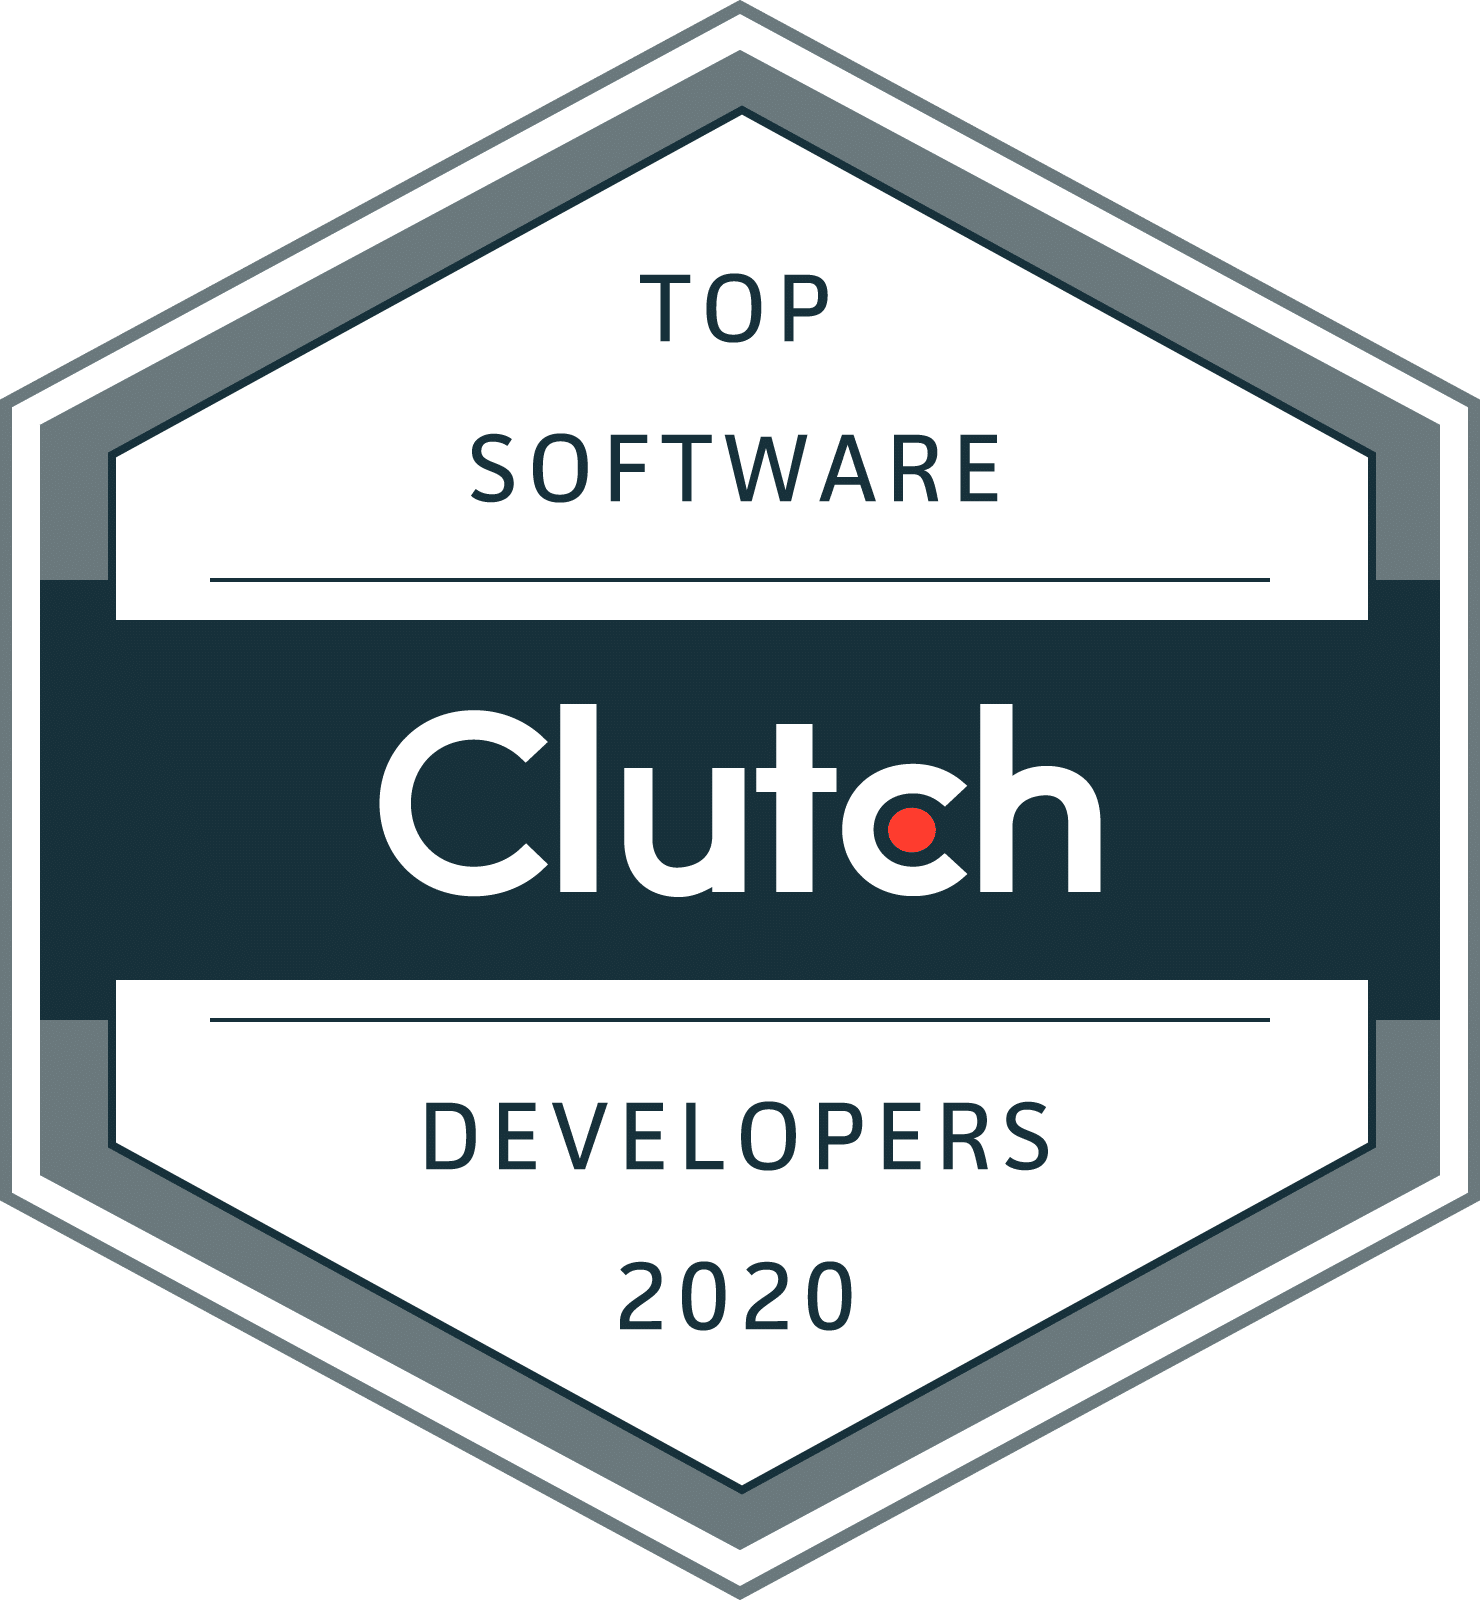 Coddle Technologies awarded as Top Software Developers by Clutch